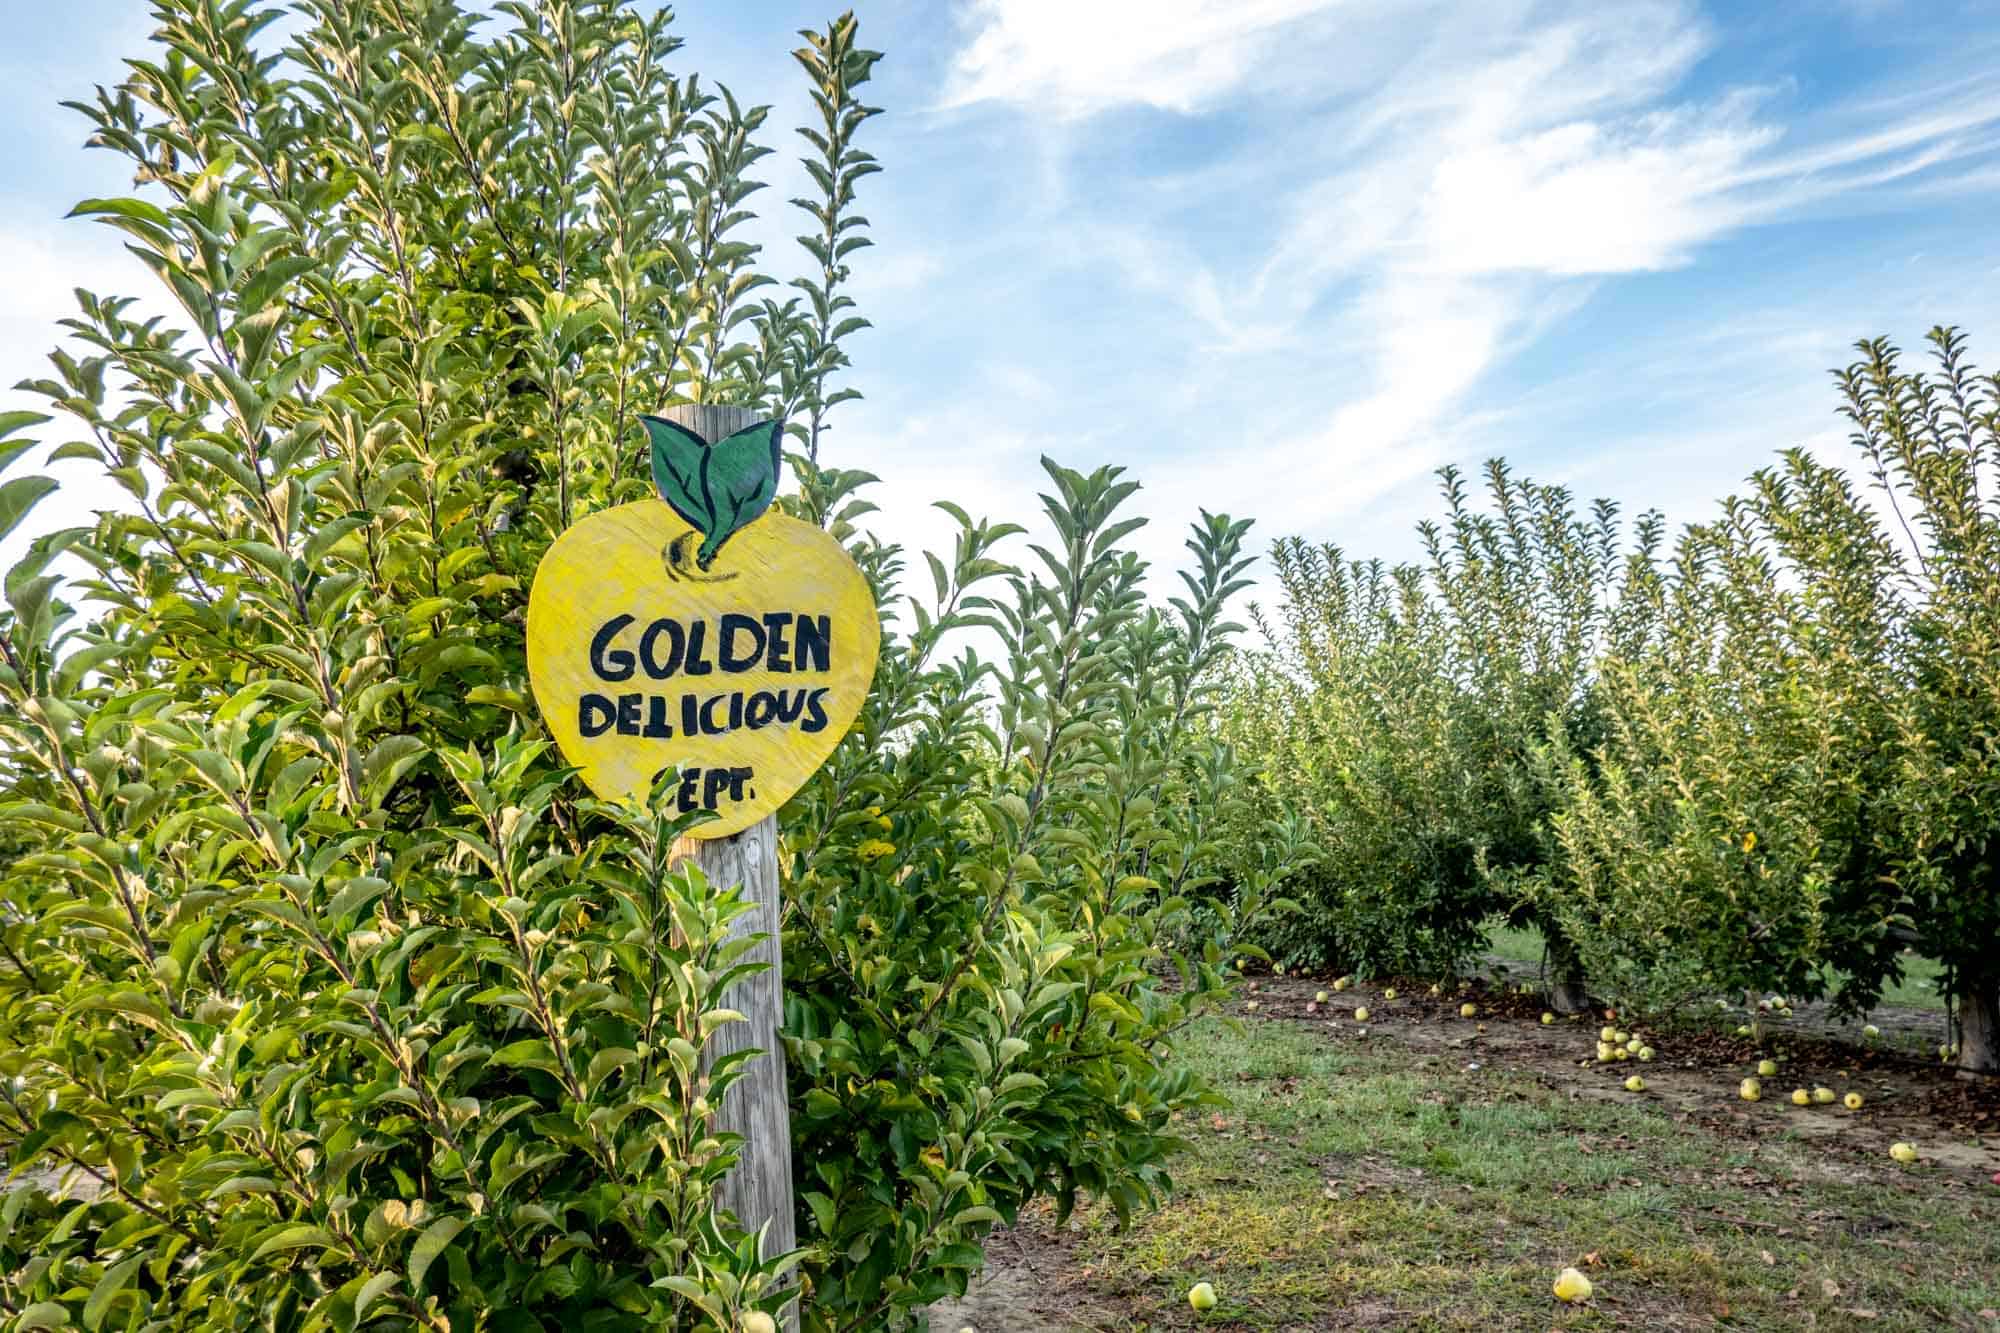 Apple orchard with a sign for "Golden Delicious" apples shaped like an apple